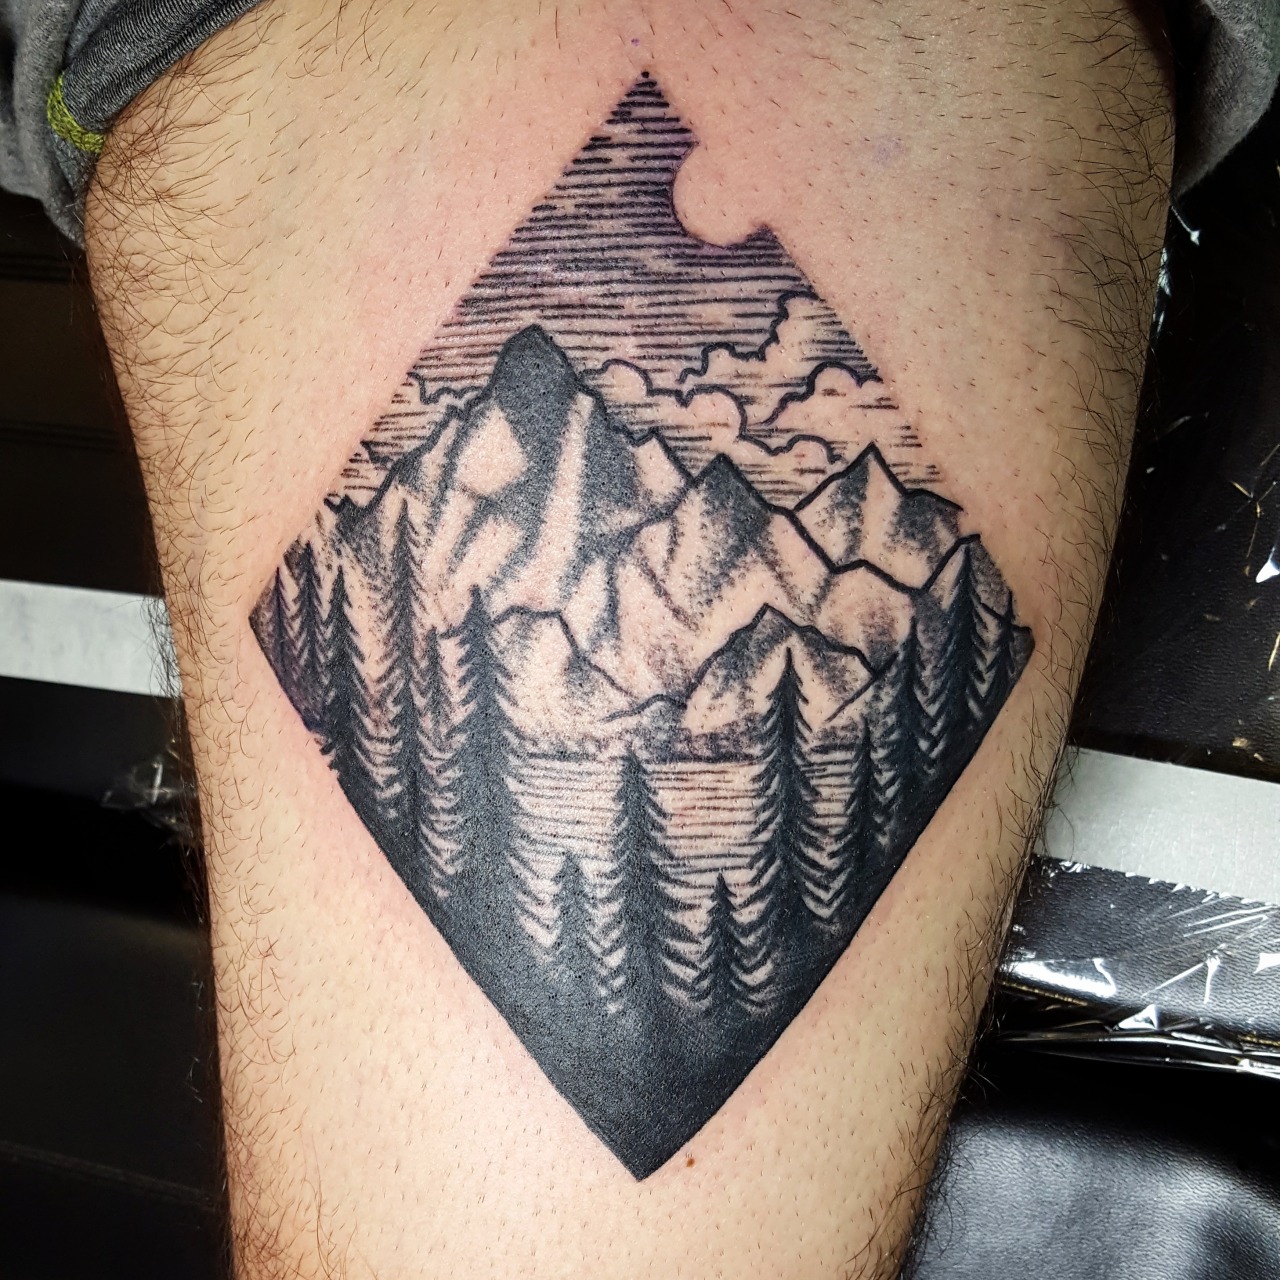 Remember when we could get tattoos? One of my favorite scenery pieces I've  done🌲 ⁣ ⁣ ⁣ ⁣ #tattoos #tattoo #scenery #blackandgrey… | Instagram